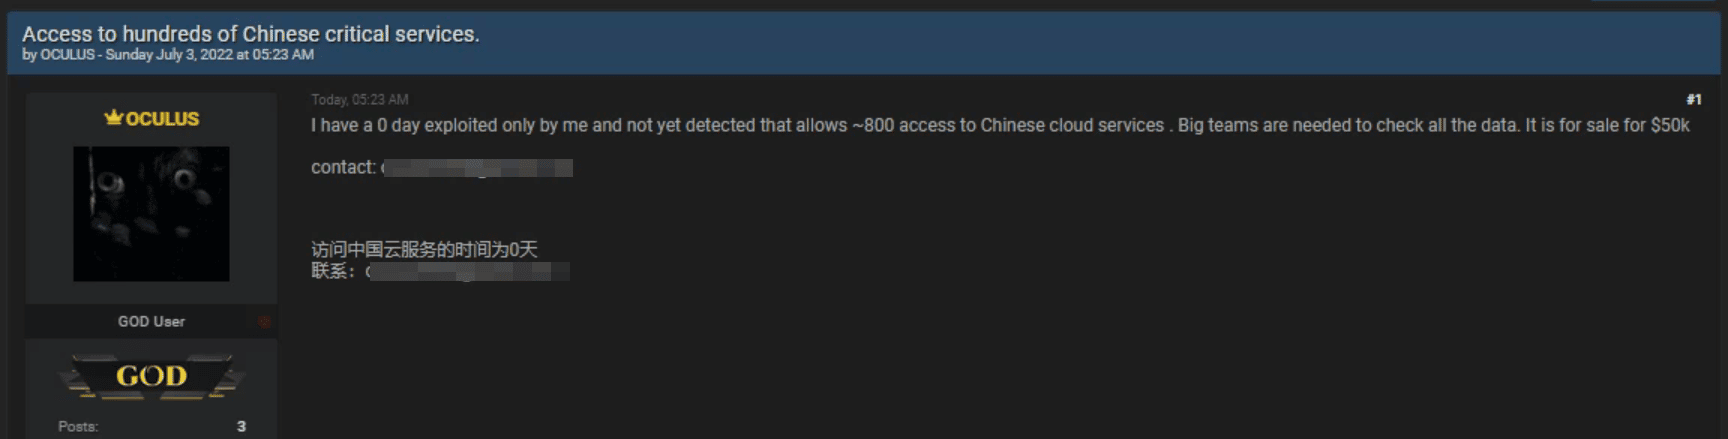 0-Day to Chinese Services offered for 50K